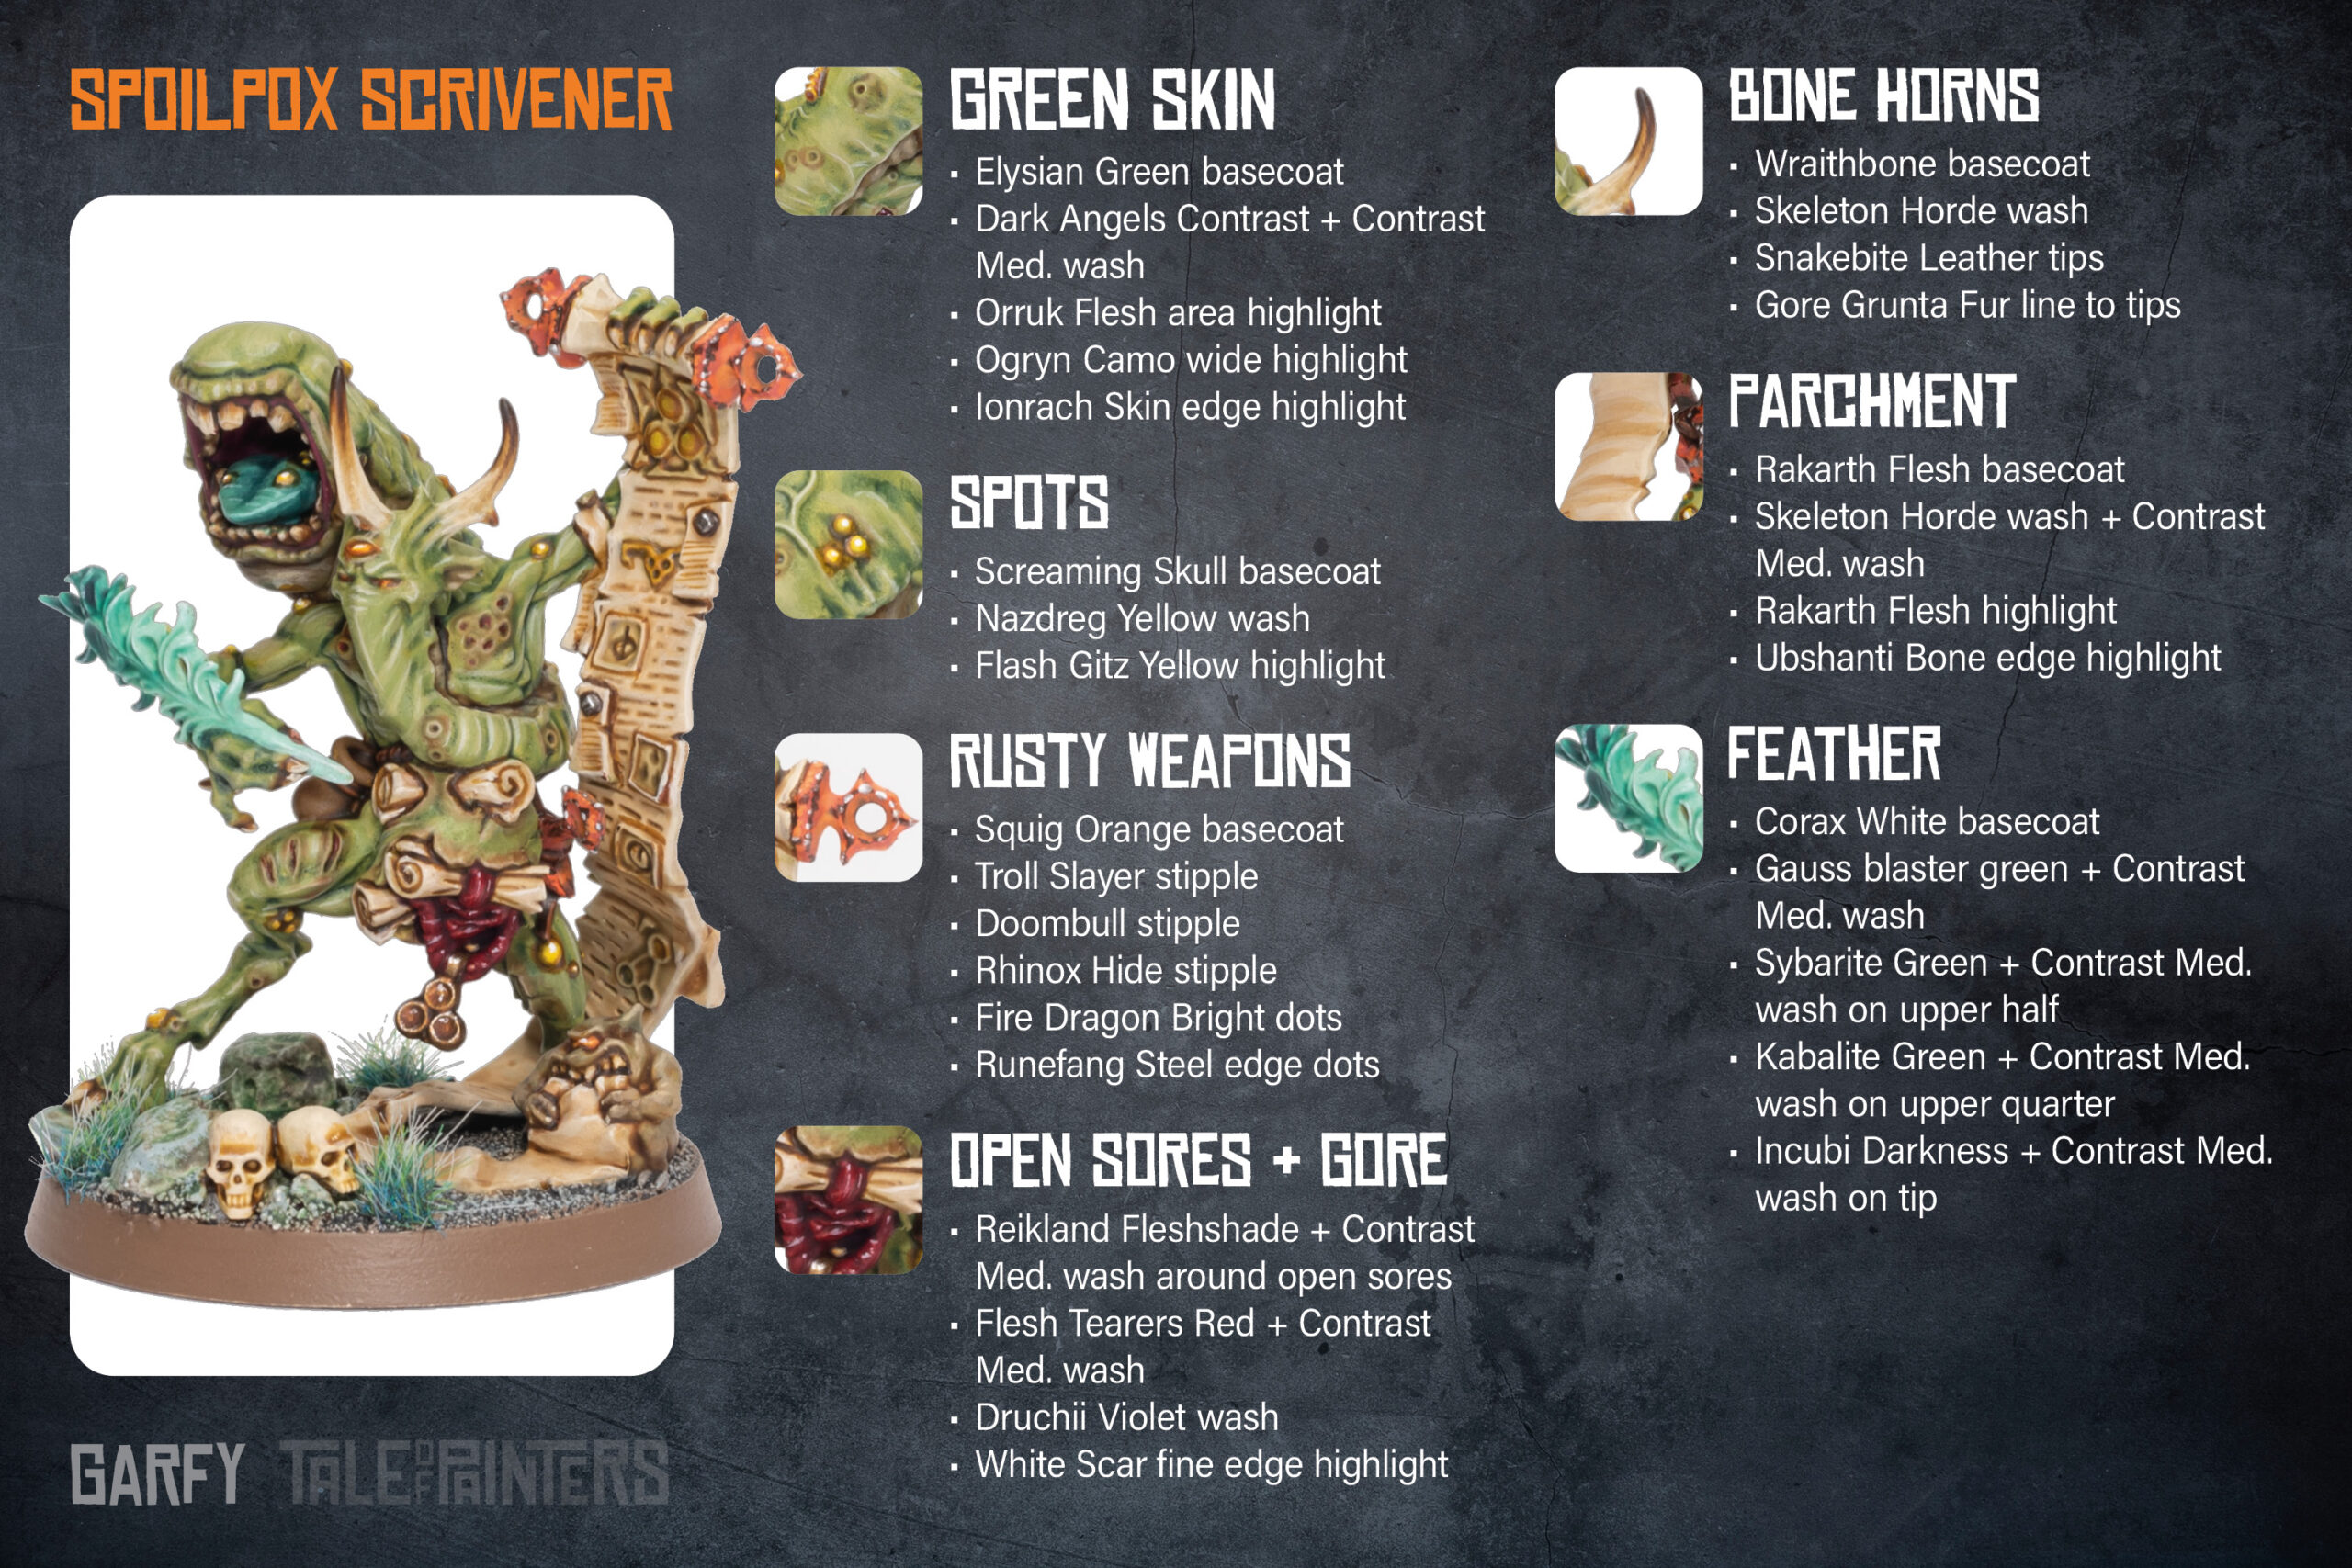 How to paint Spoilpox Scrivener Nurgle Plaguebearers by Garfy